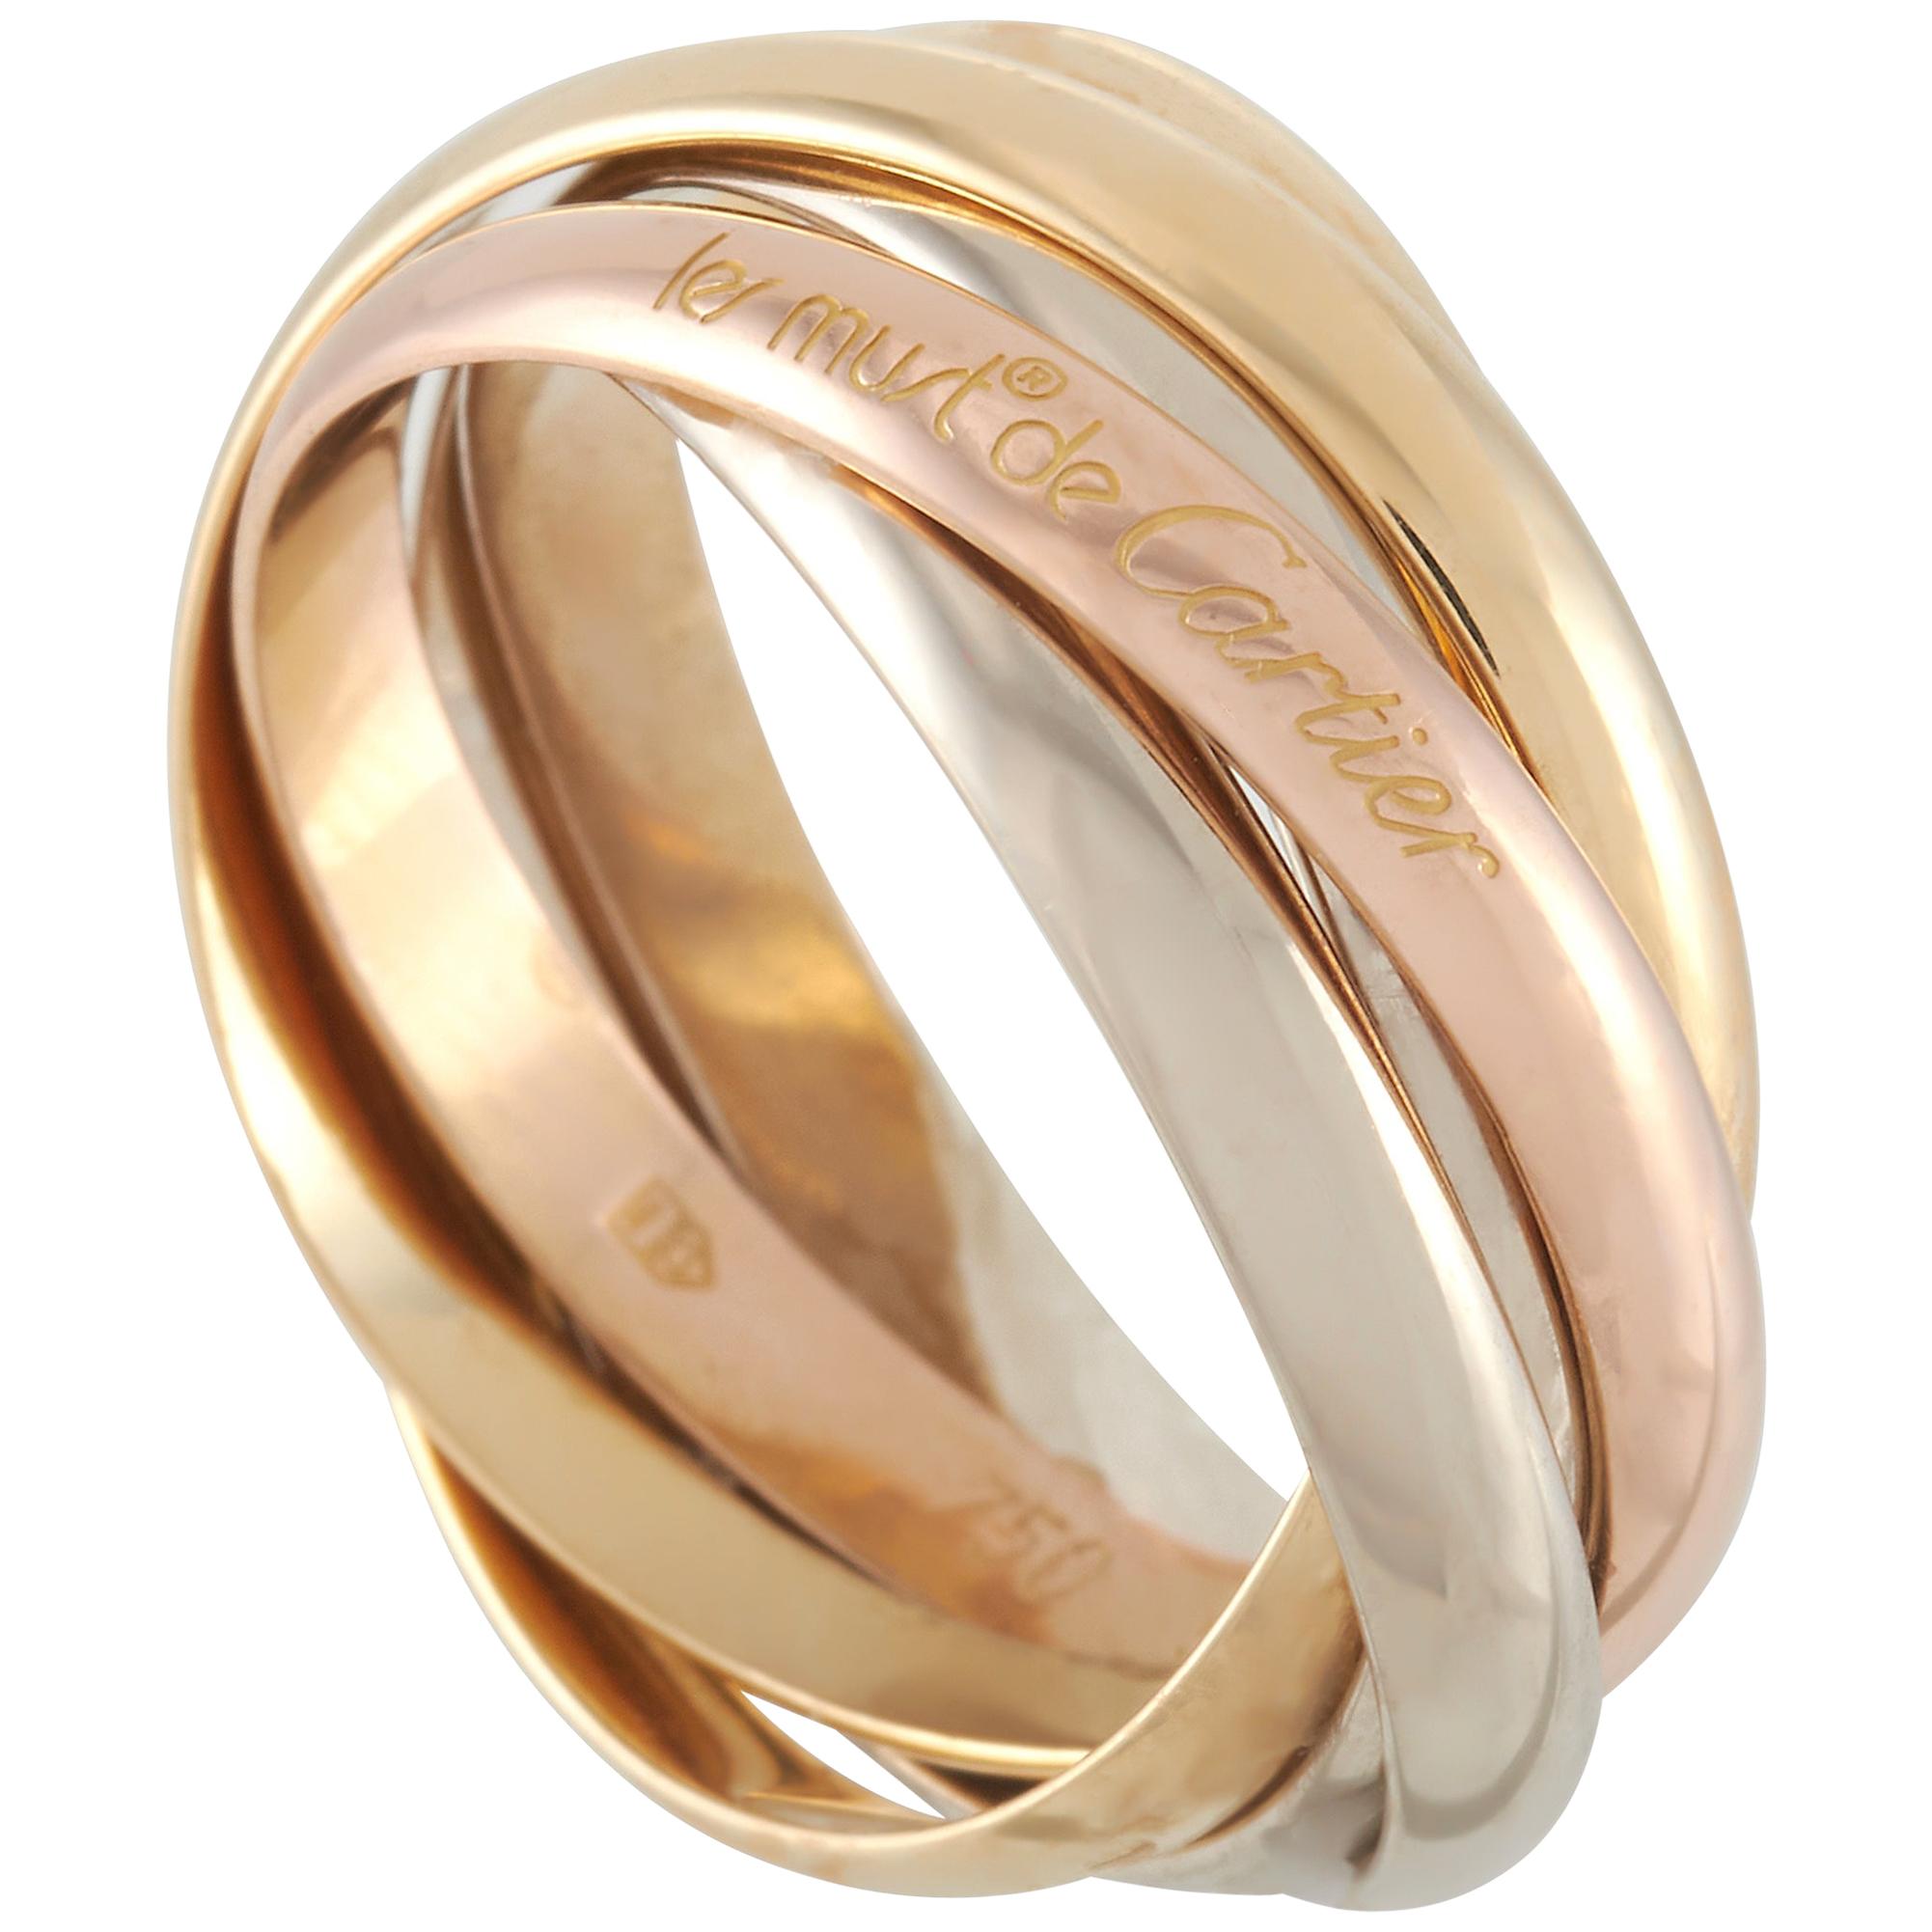 Cartier Trinity 18 Karat Yellow, White and Rose Gold 5 Band Ring